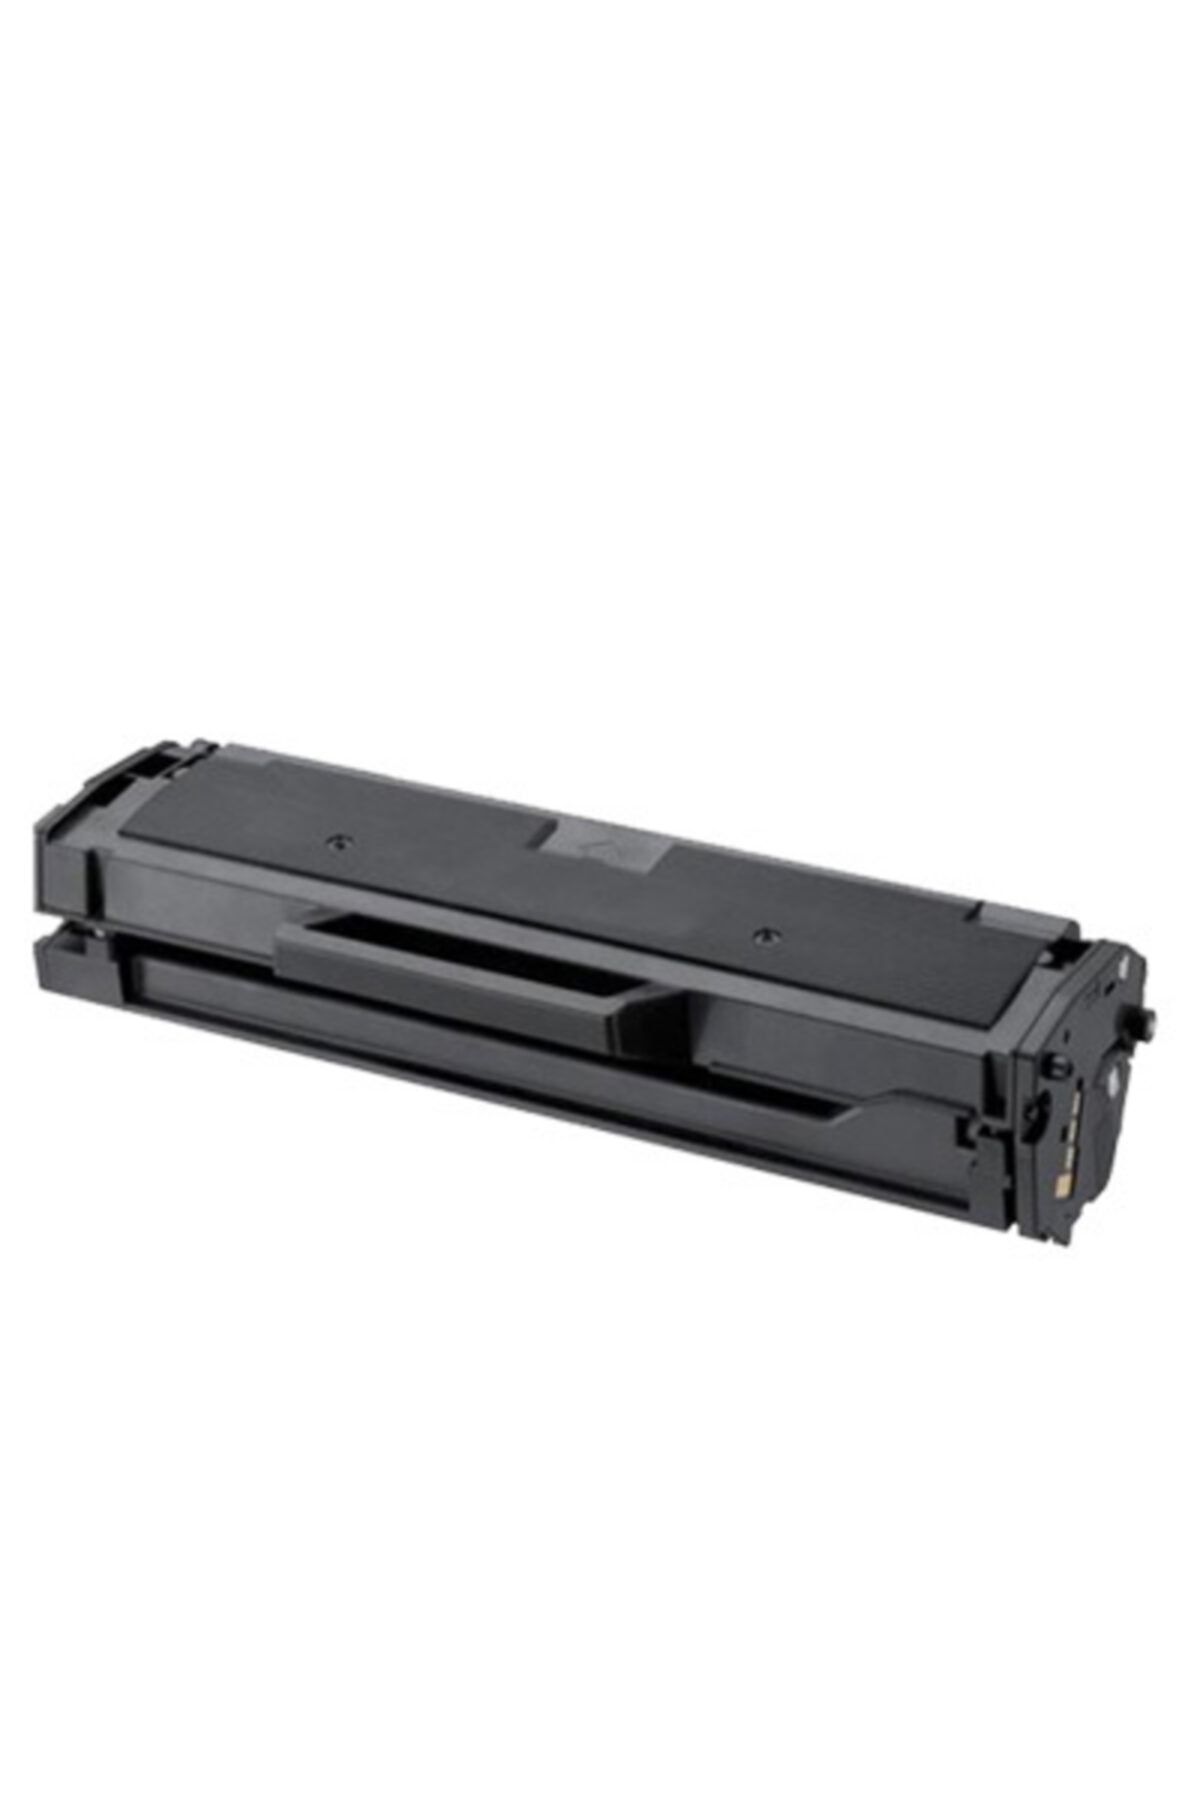 Samsung For Ml 2165, 2165w, Scx 3405, 3405f, 3405fw Ithal! Mlt D101s Toner